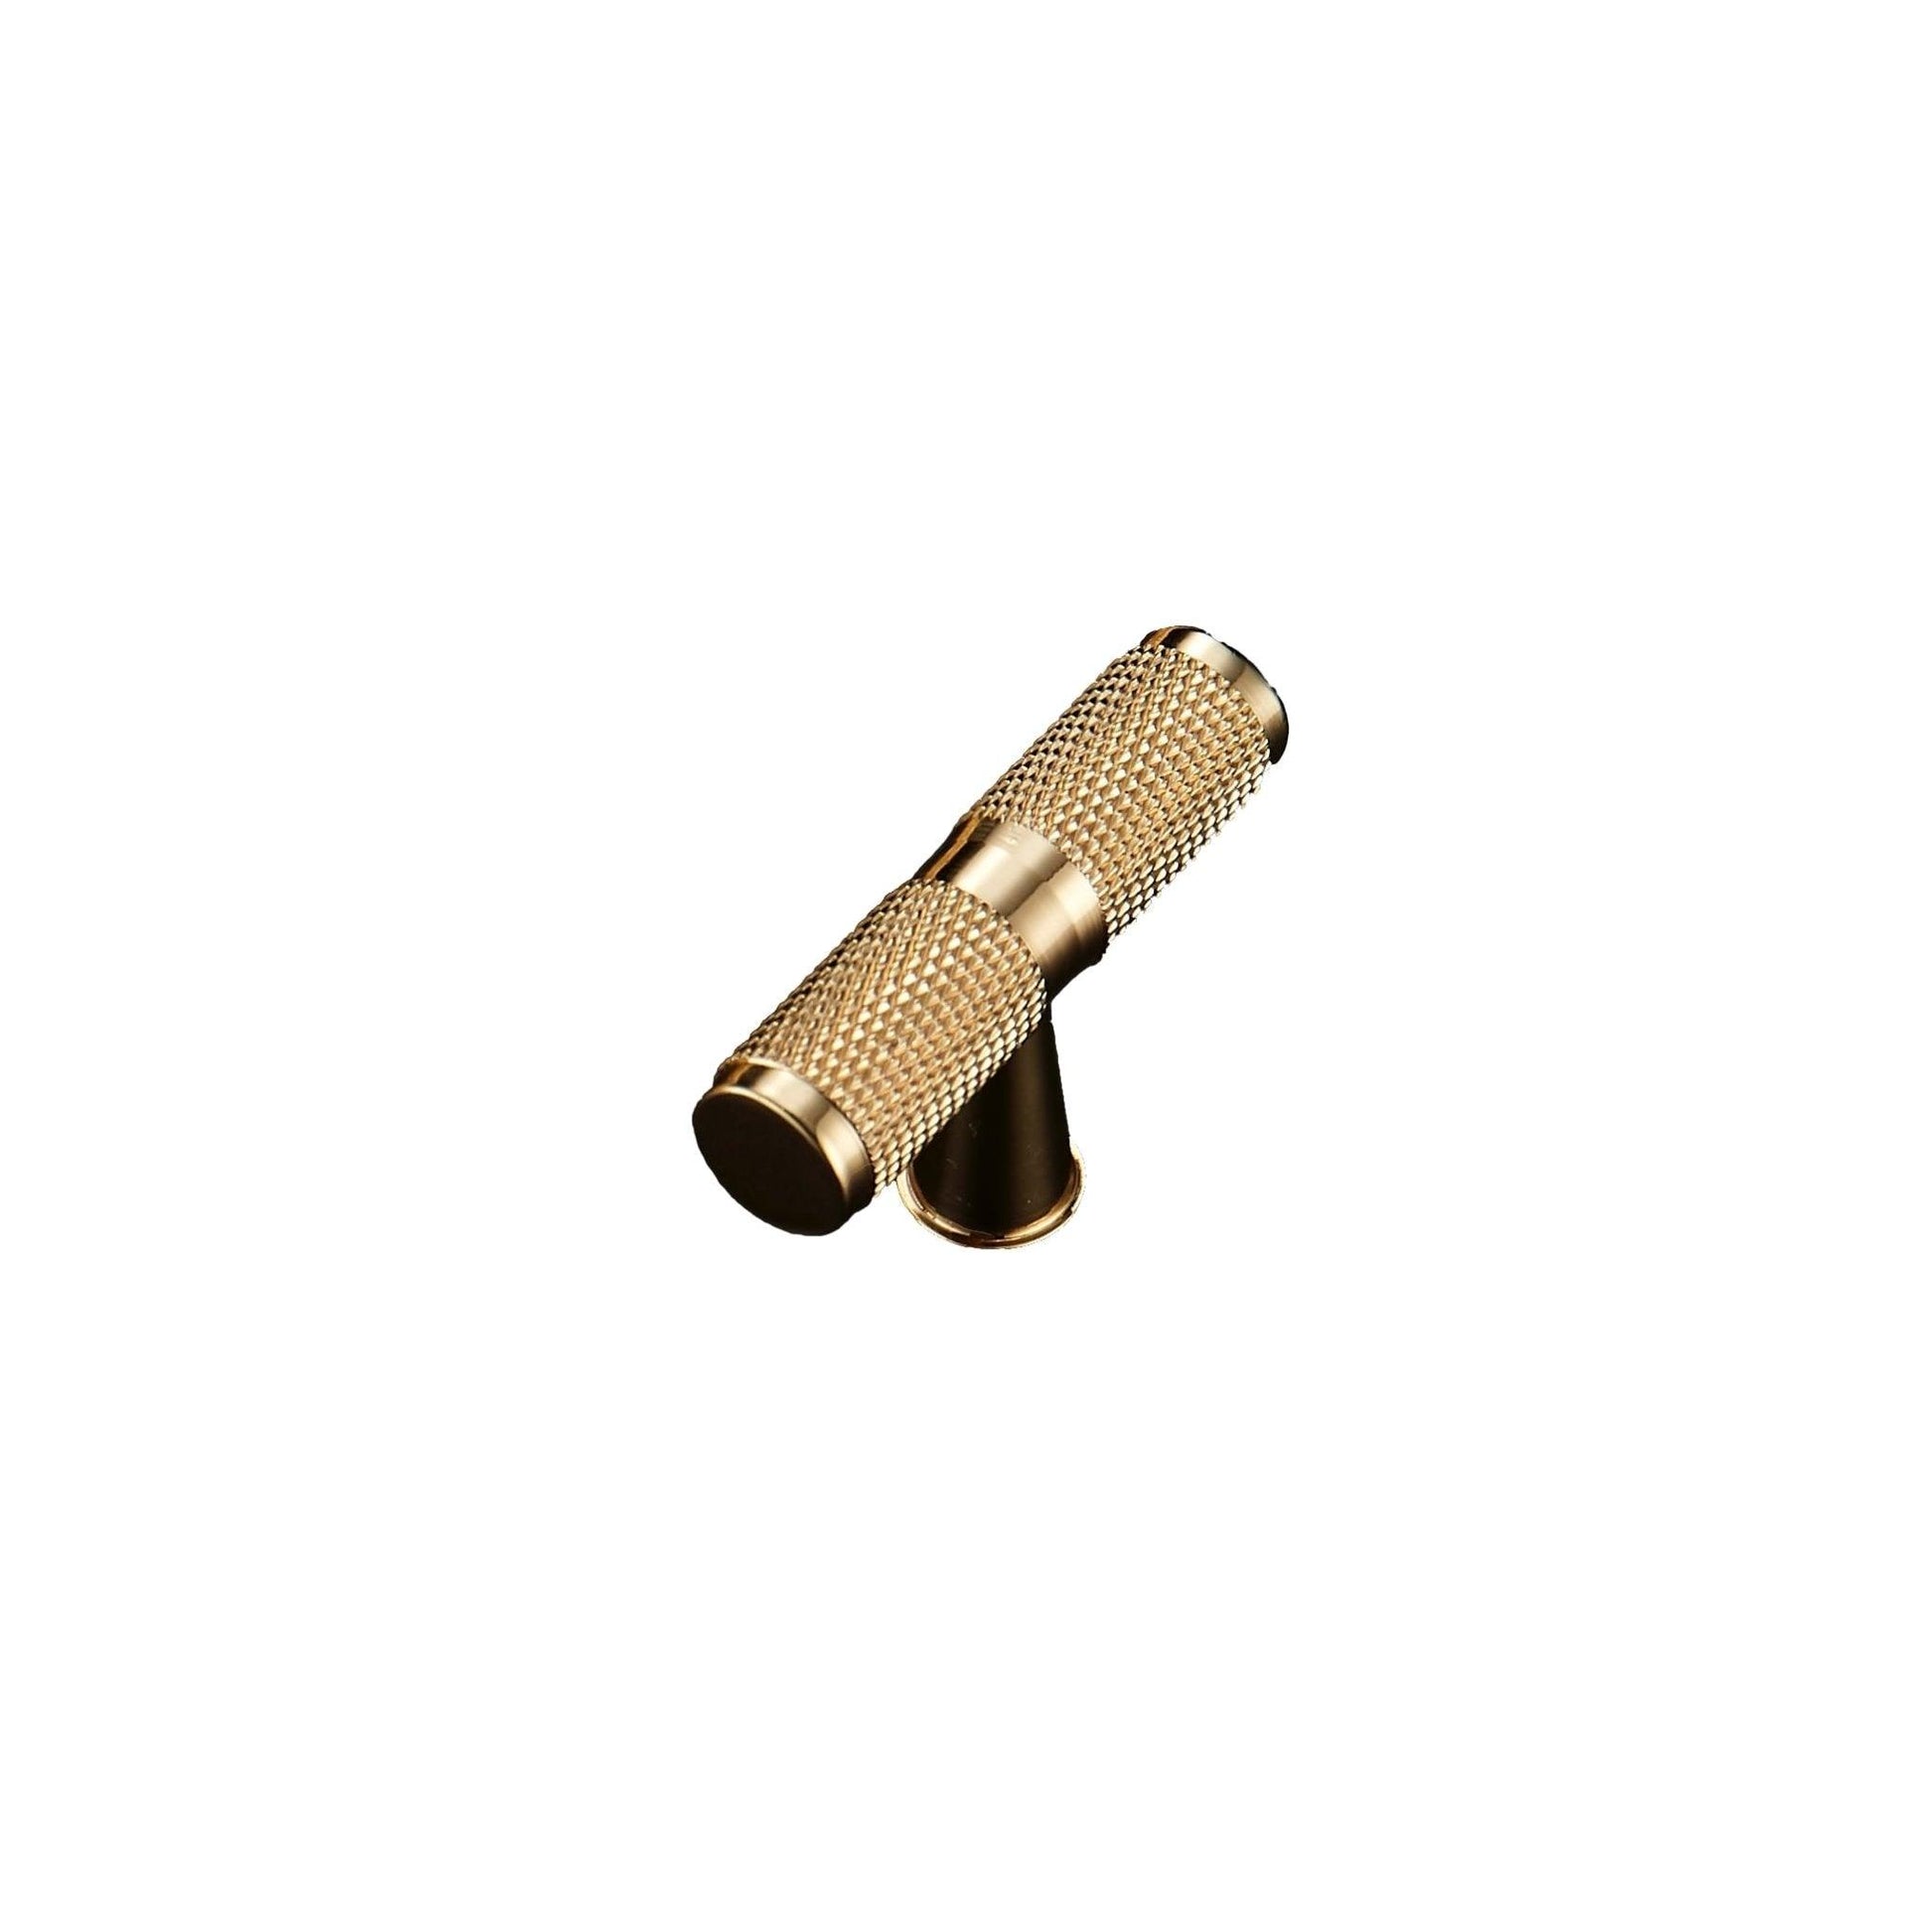 PORTA / SOLID BRASS KNURLED T-BAR - Handle Shop Couture 